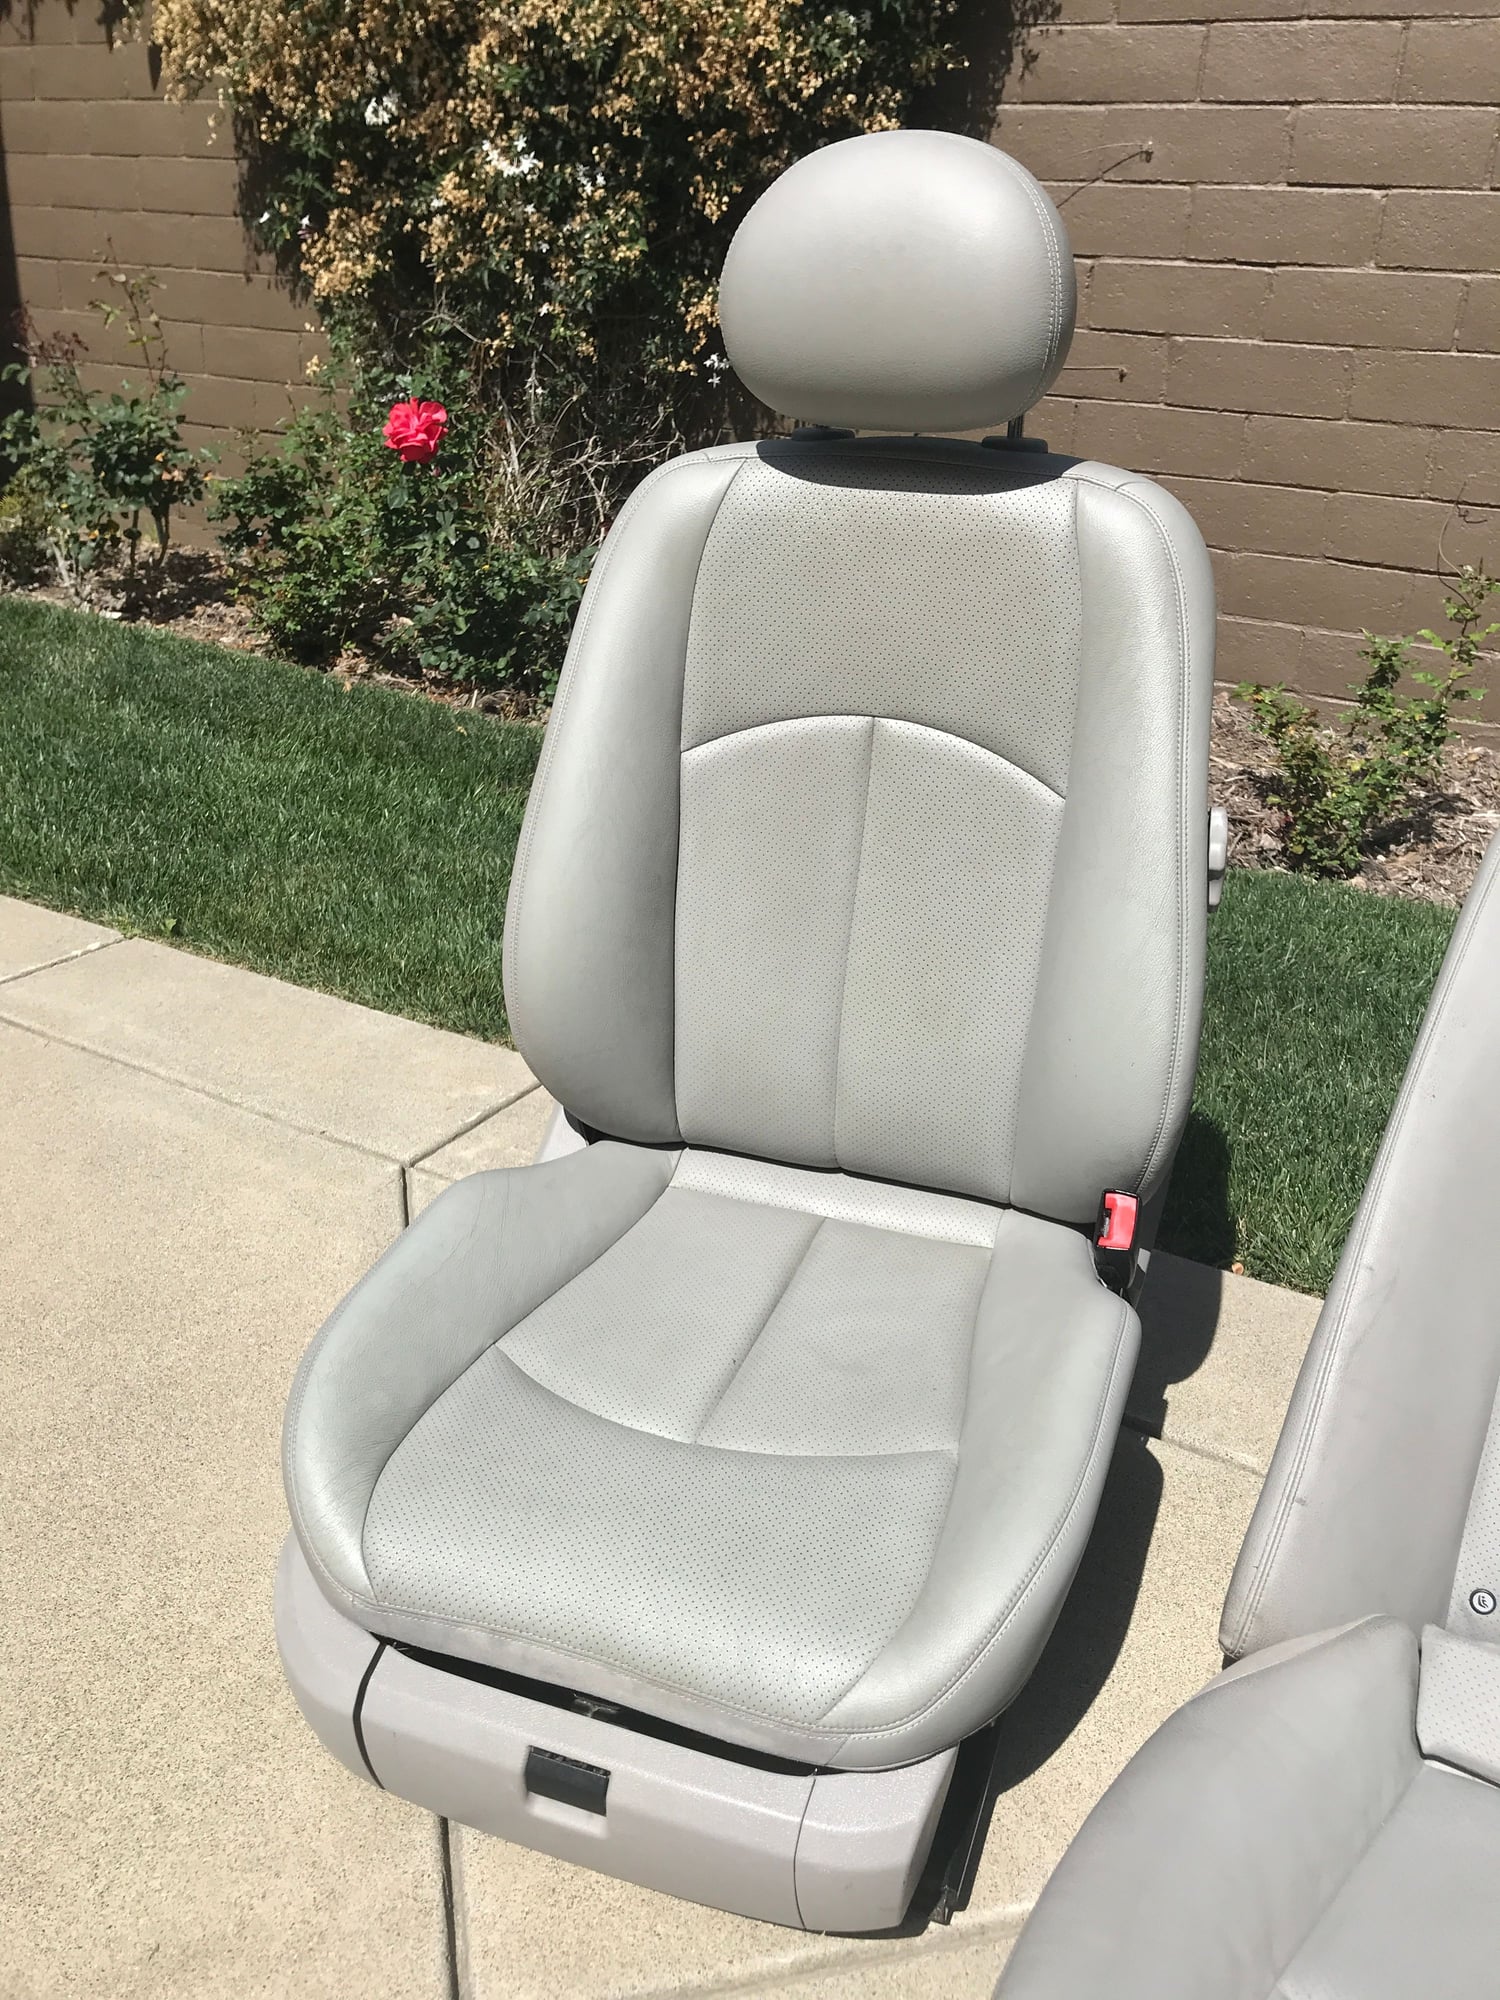 Interior/Upholstery - 2002-05 W211 E500 grey seats - Used - 2002 to 2005 Mercedes-Benz E500 - 2002 to 2005 Mercedes-Benz E320 - Newport Beach, CA 92660, United States